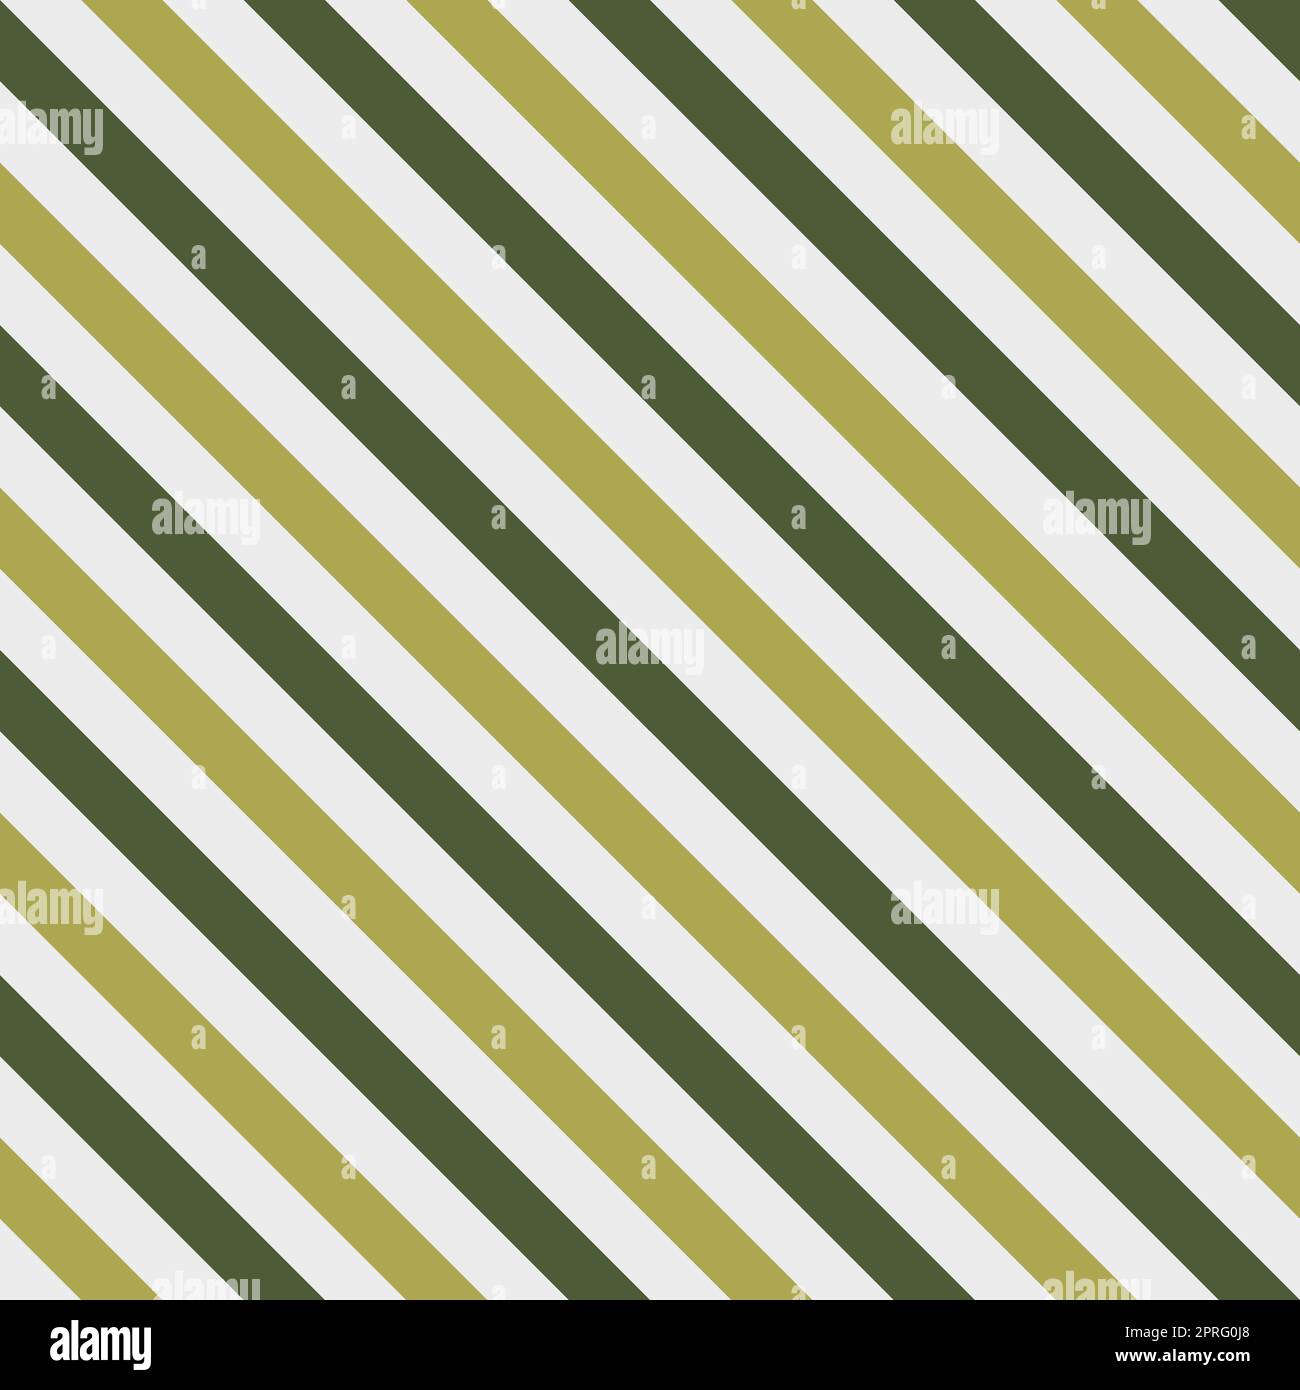 Green color and yellow strip on gray background. Pattern diagonal stripe seamless for graphic design, fabric, textile, fashion. Stock Photo